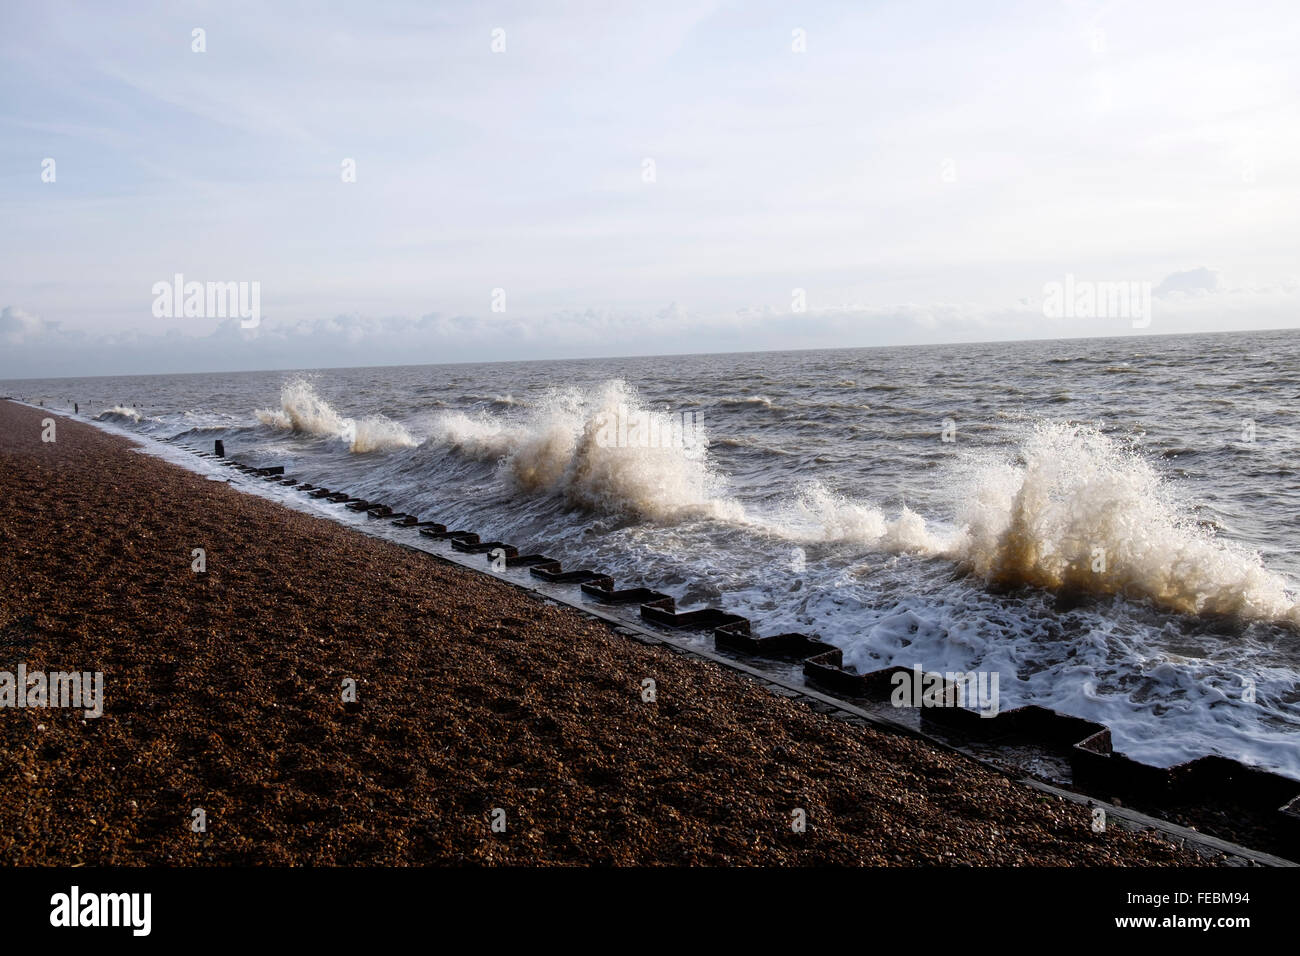 Waves which have bounced off a seawall crashing onto incoming waves, Bawdsey Ferry, Suffolk, UK. Stock Photo